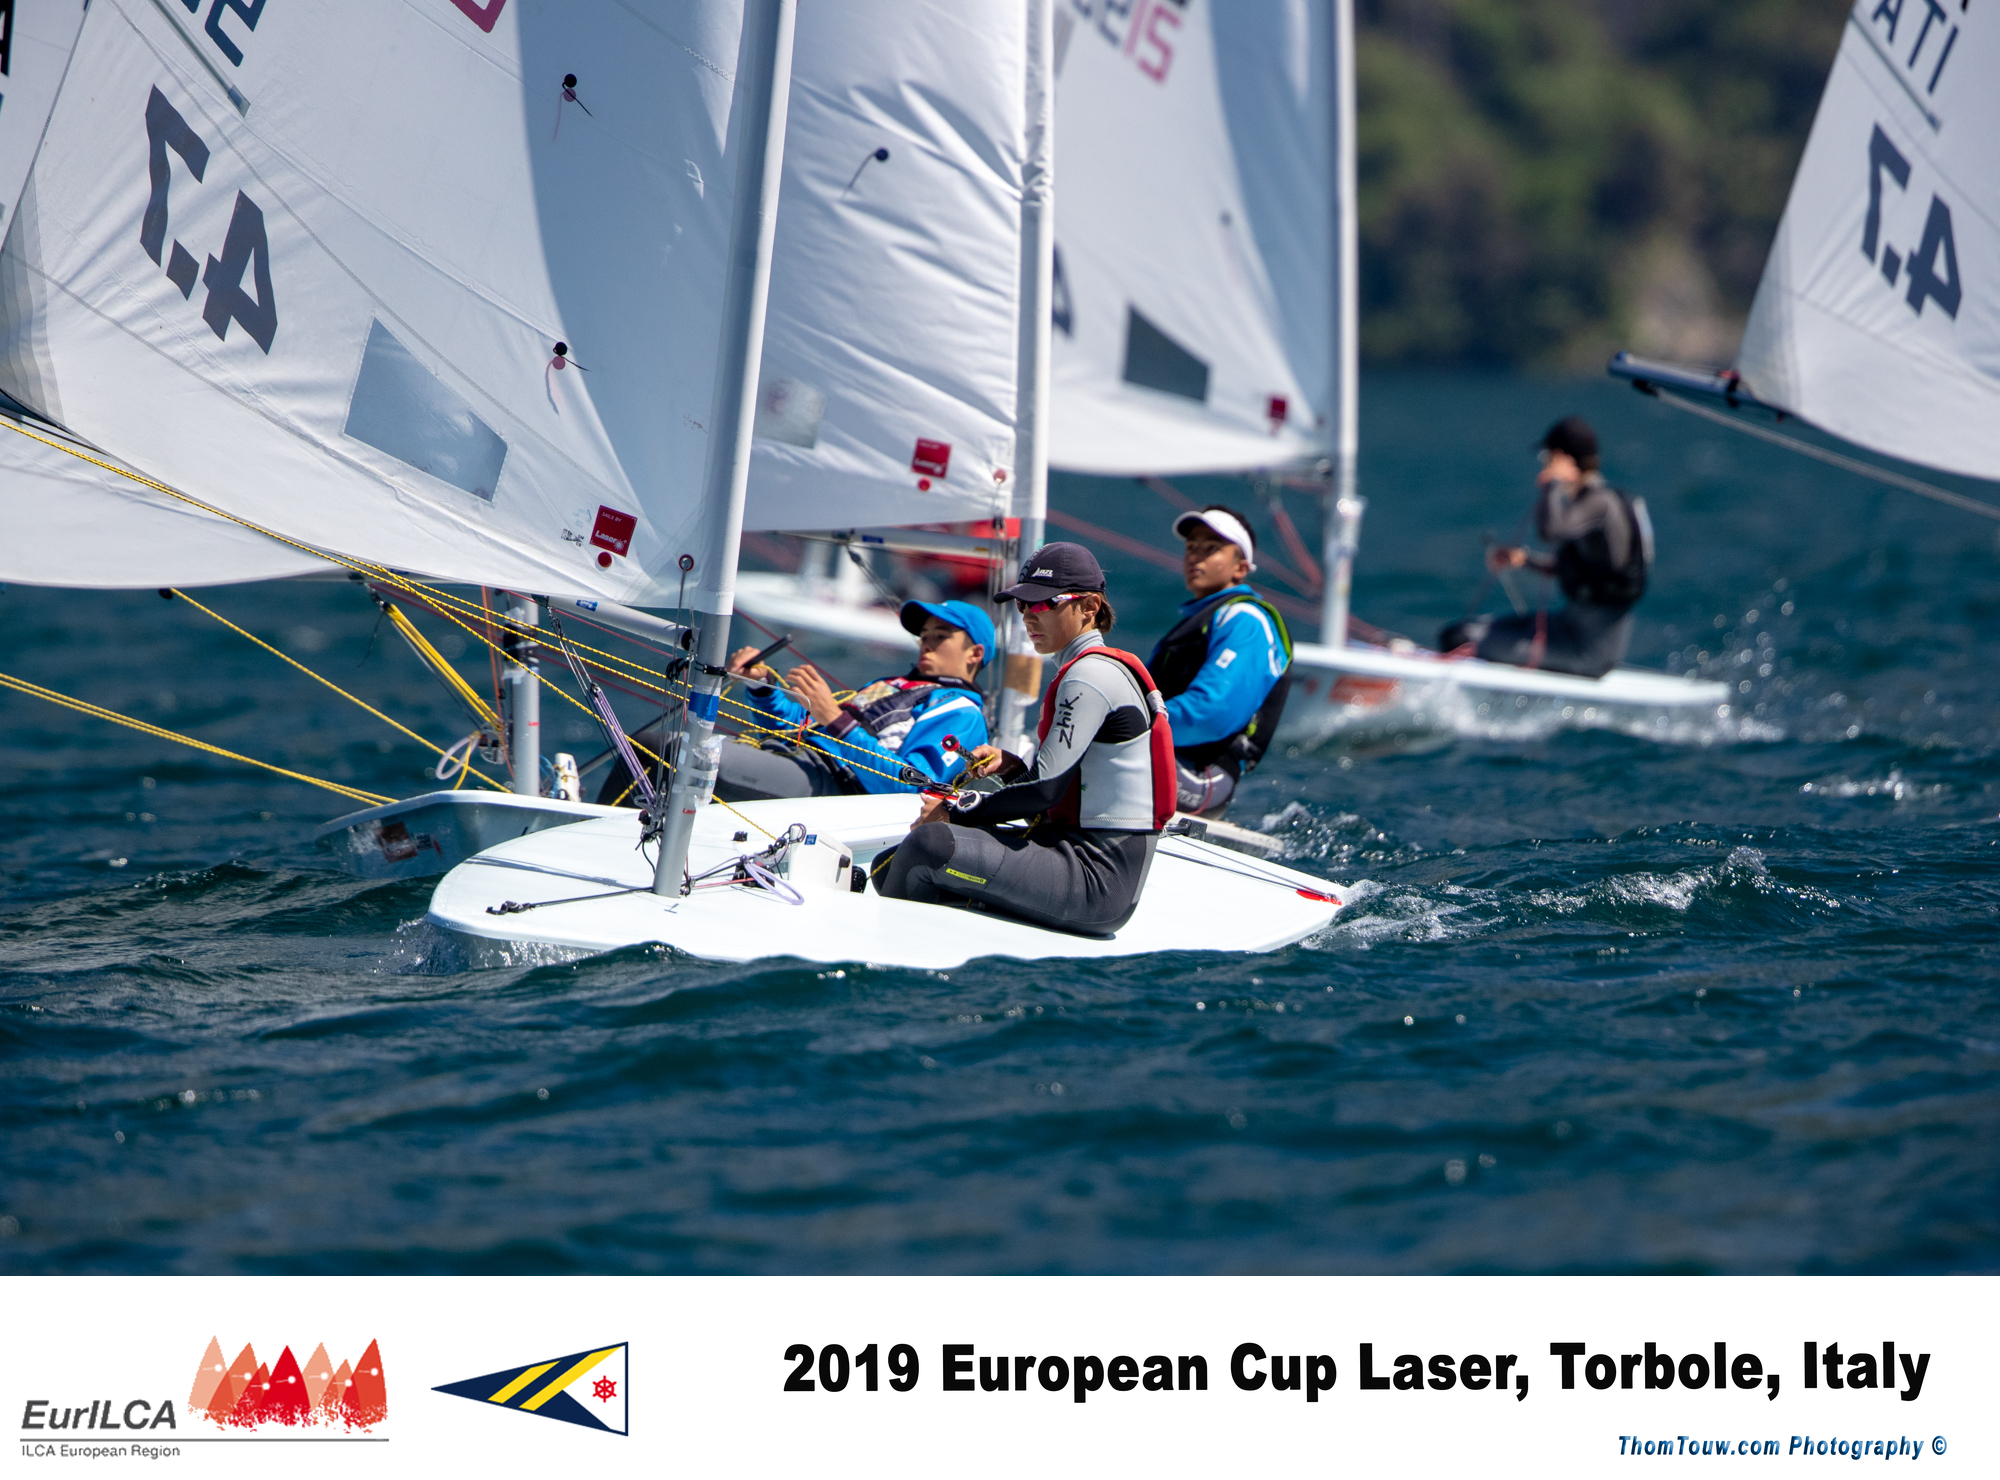  Laser  Europacup 2019  Act 4  Torbole ITA  Day 1, the Swiss